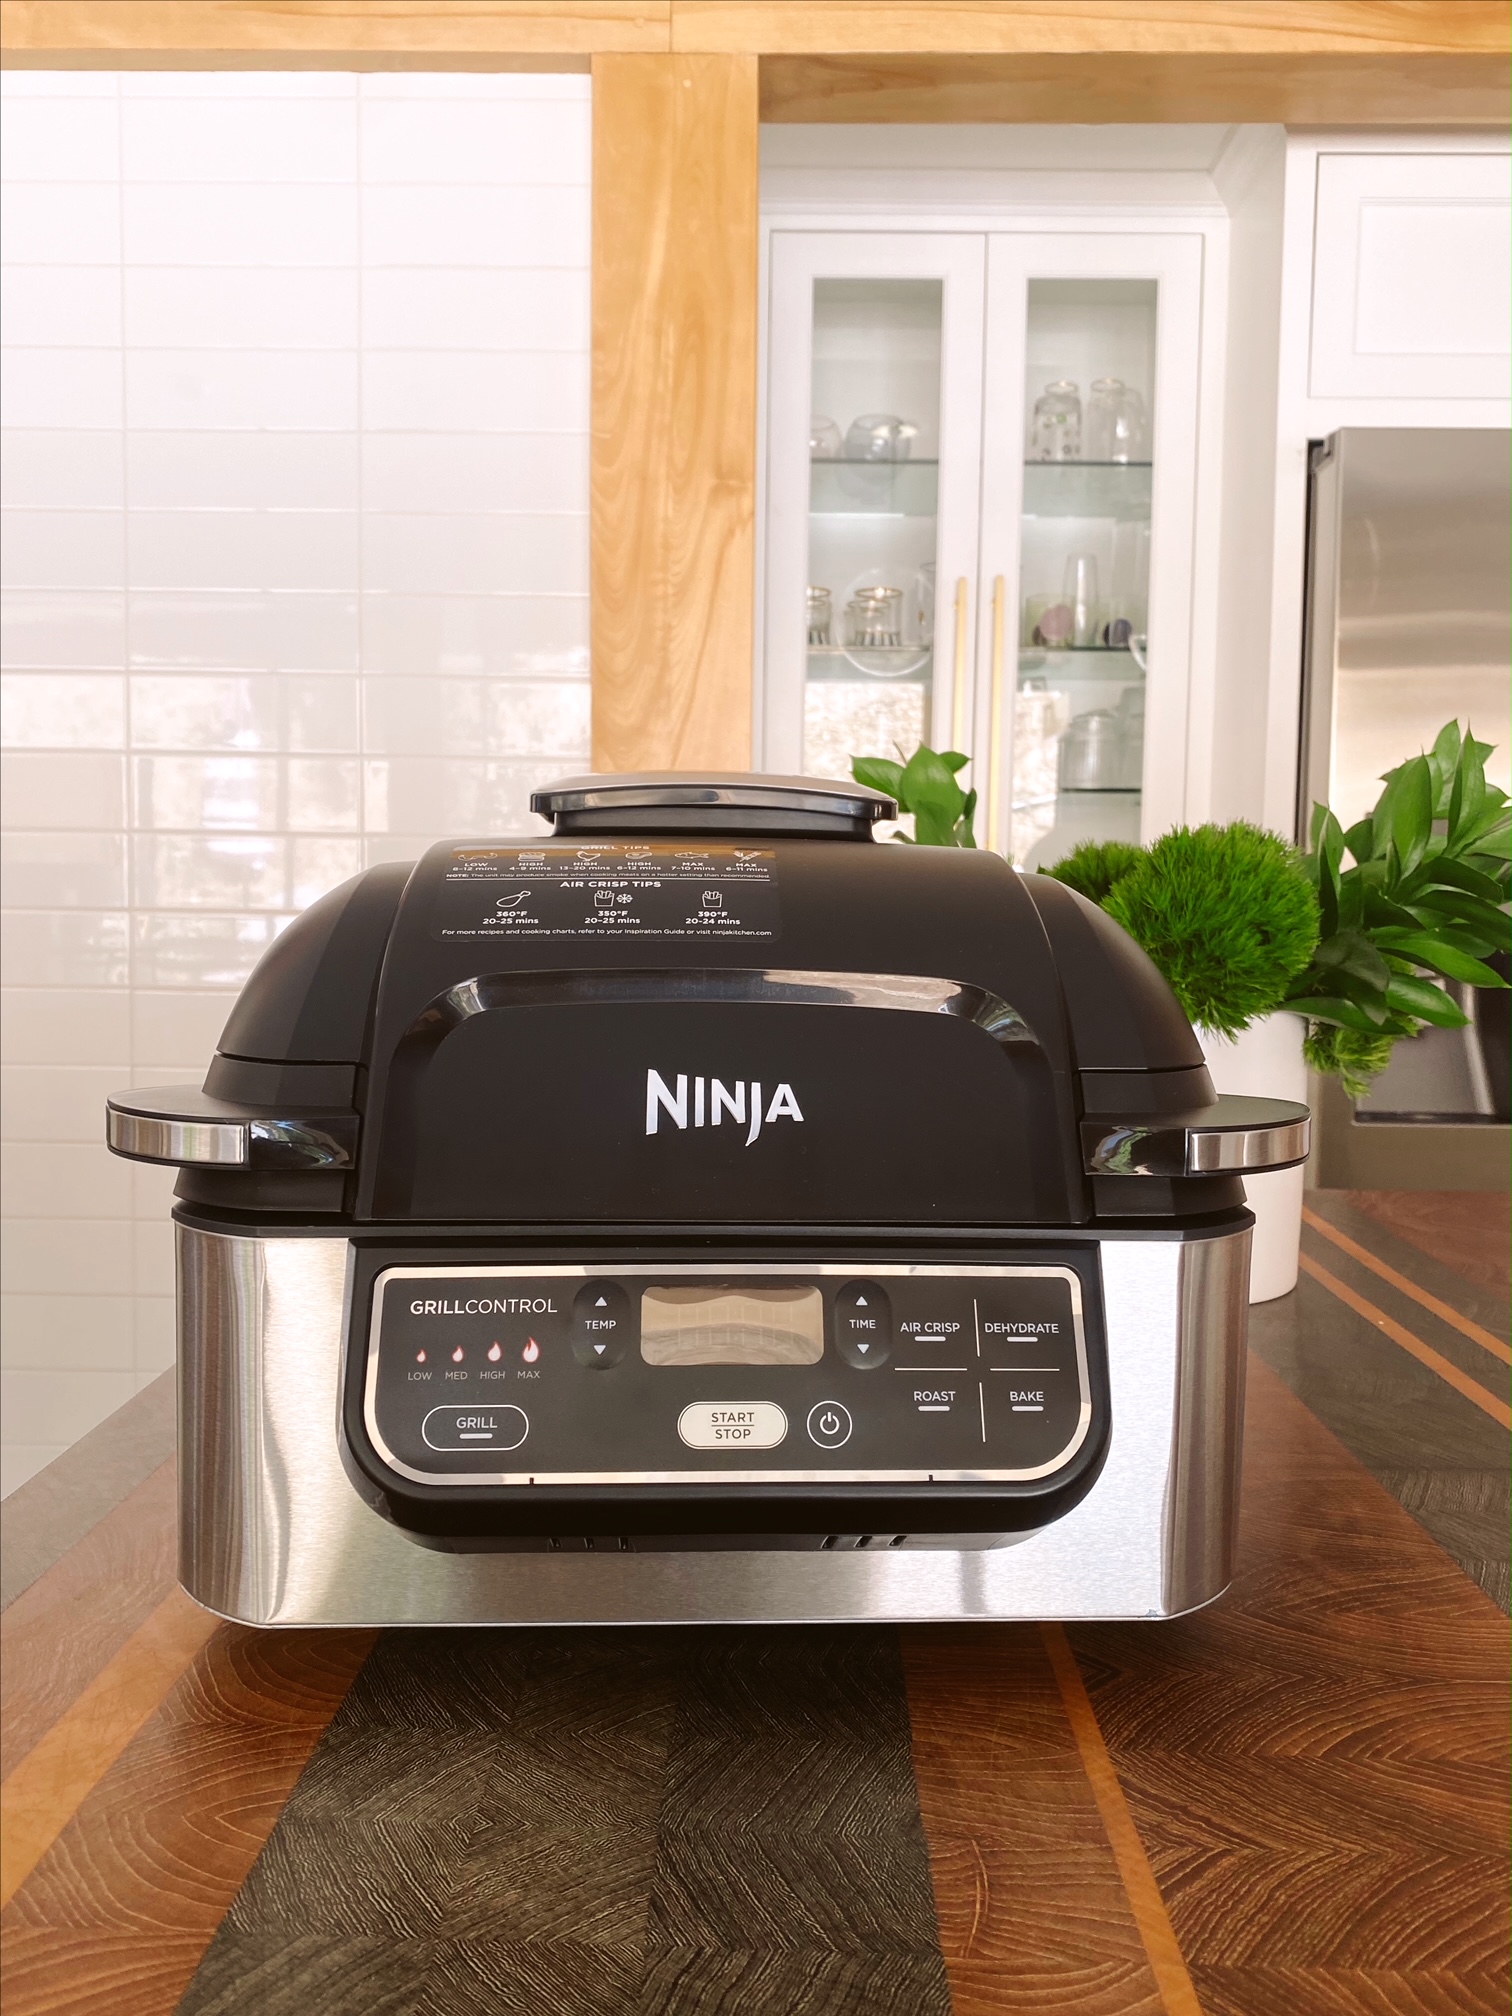 Ninja indoor grill | Home Must-Haves from The Home Depot